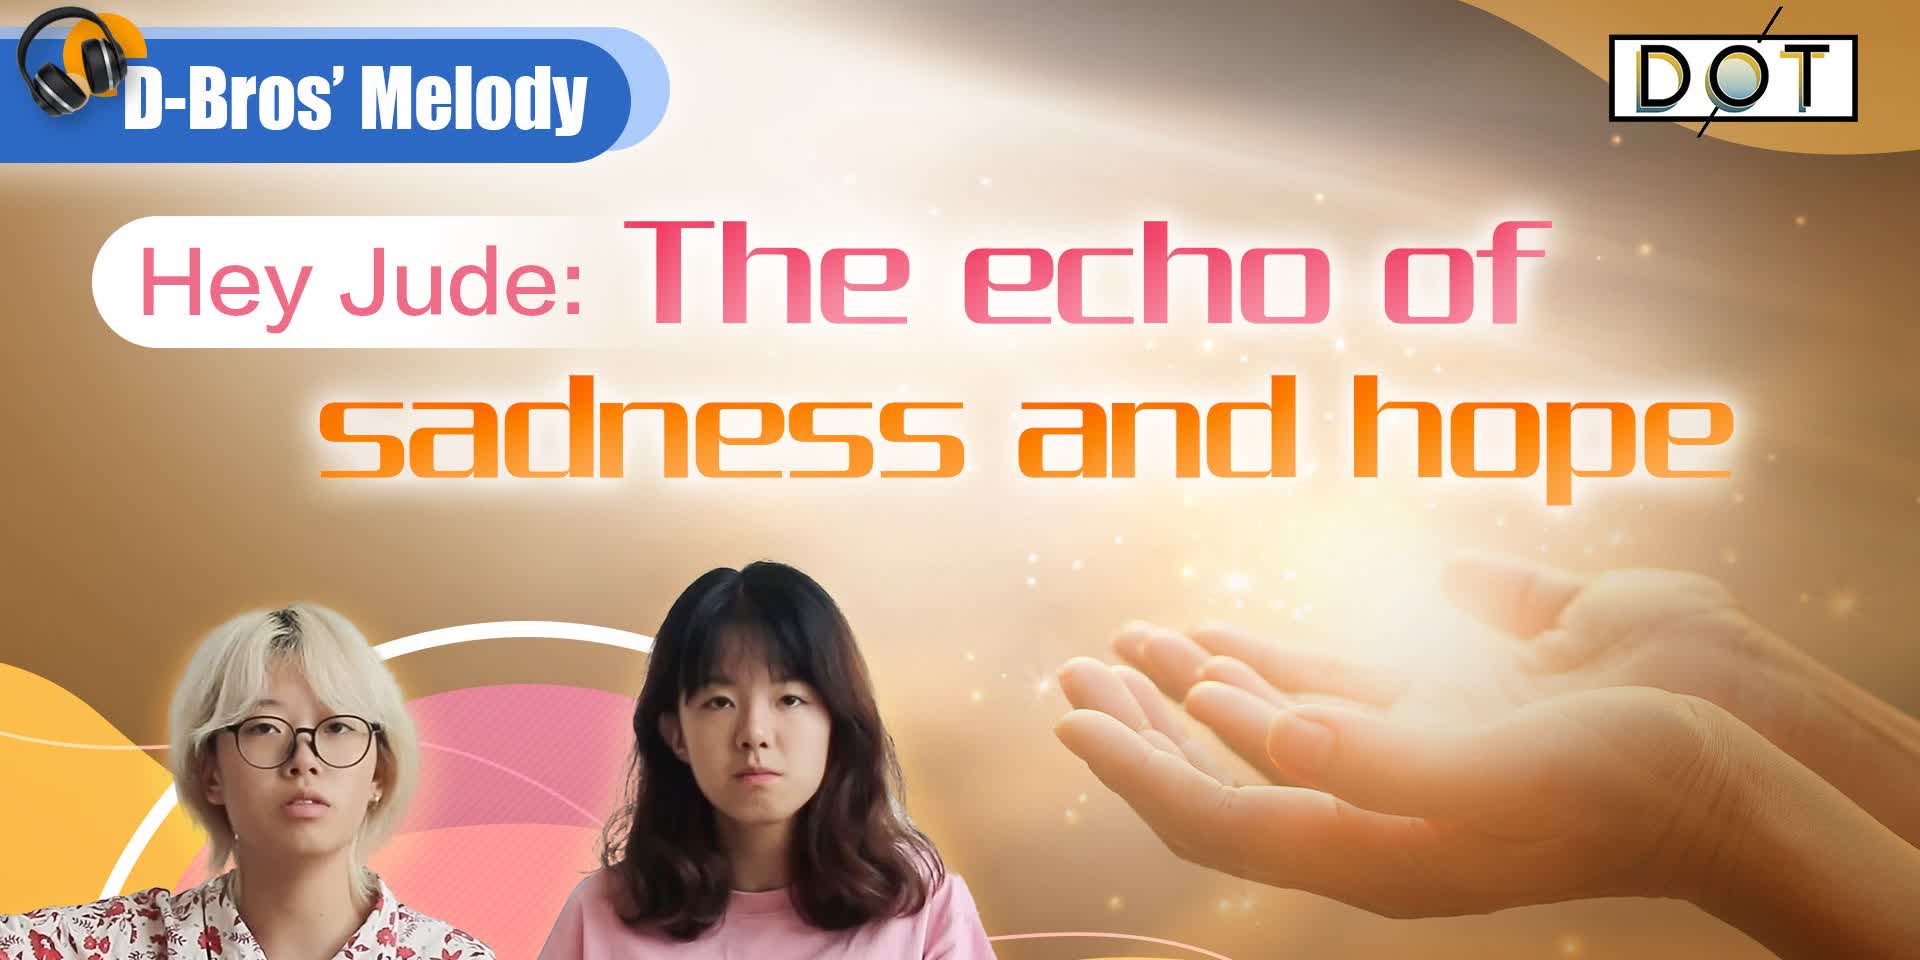 D-Bros' Melodies SP3 | Hey Jude: The echo of sadness and hope